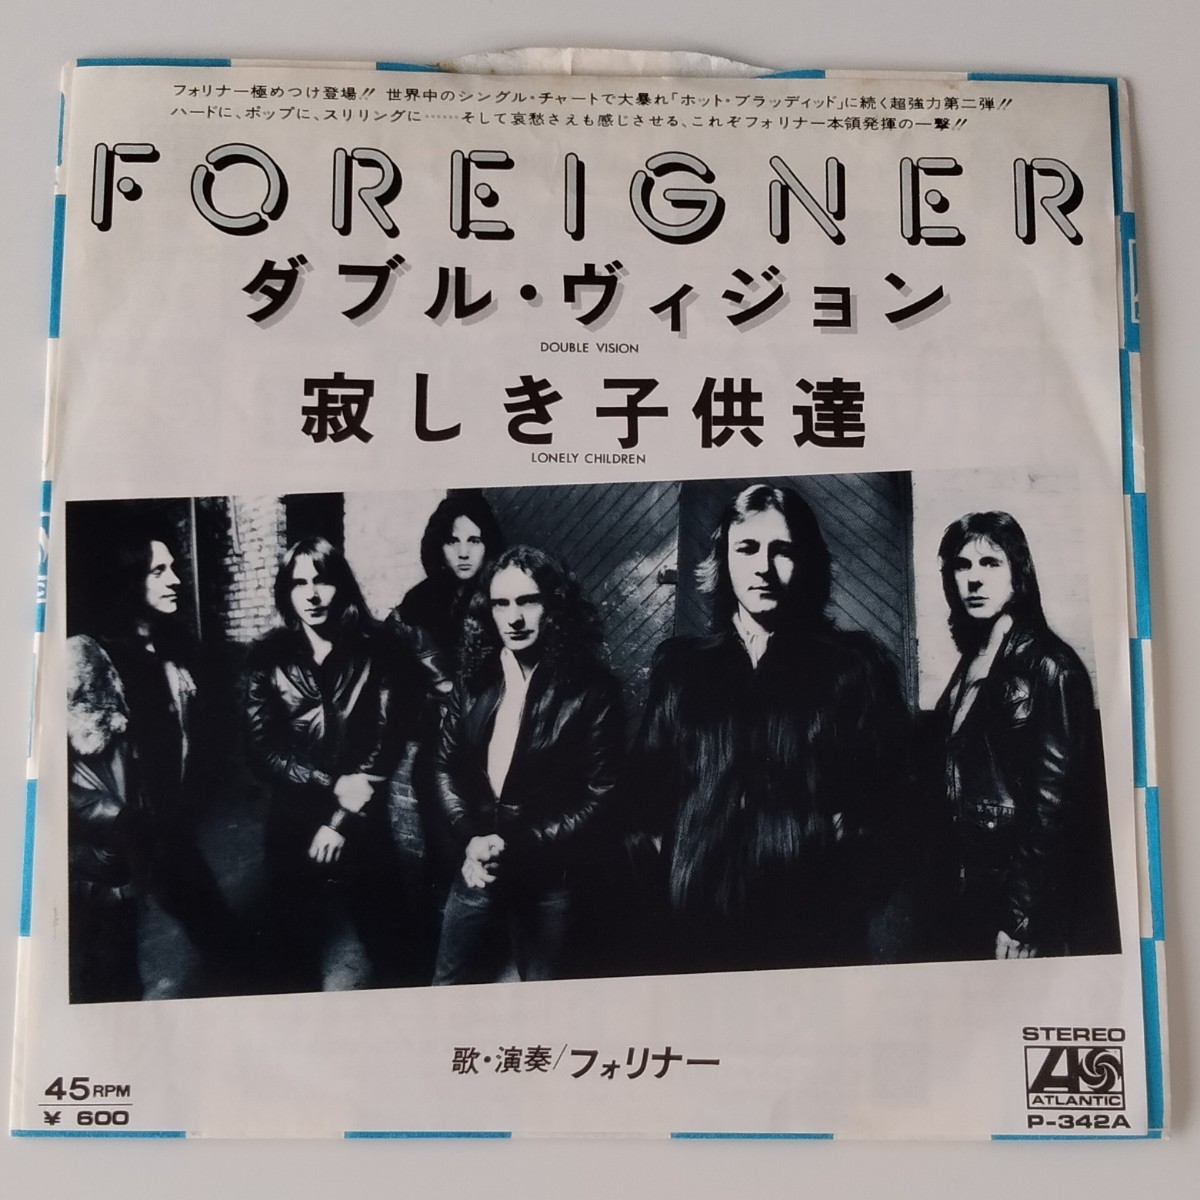 【7inch】FOREIGNER / DOUBLE VISION (P-342A) フォリナー / ダブル・ヴィジョン / LONELY CHILDREN 寂しき子供達 EPの画像1